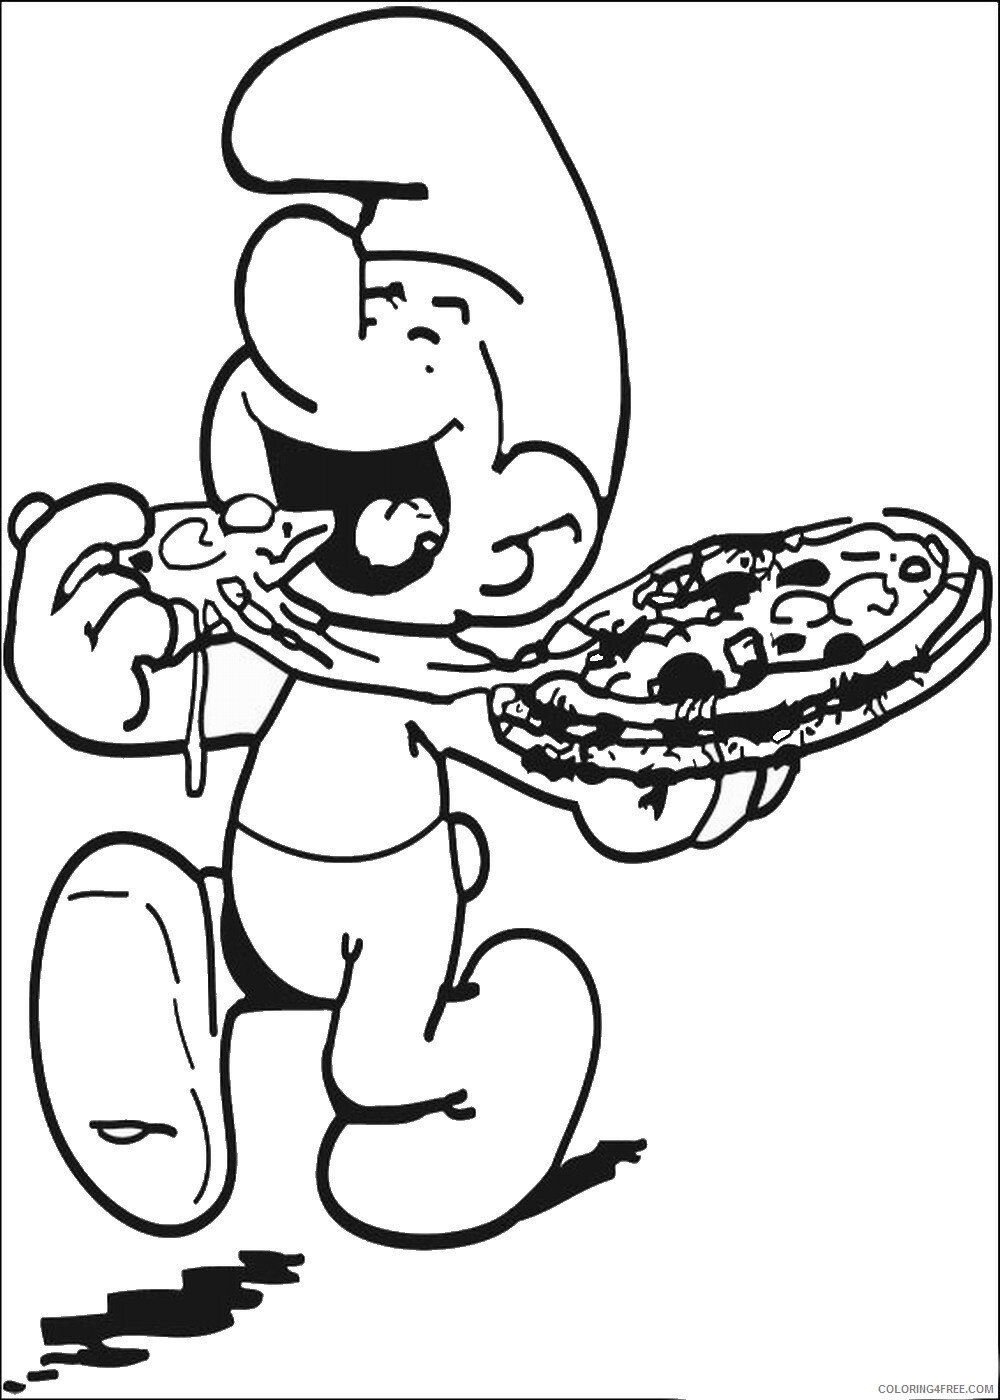 The Smurfs Coloring Pages TV Film smurfs_37 Printable 2020 09738 Coloring4free